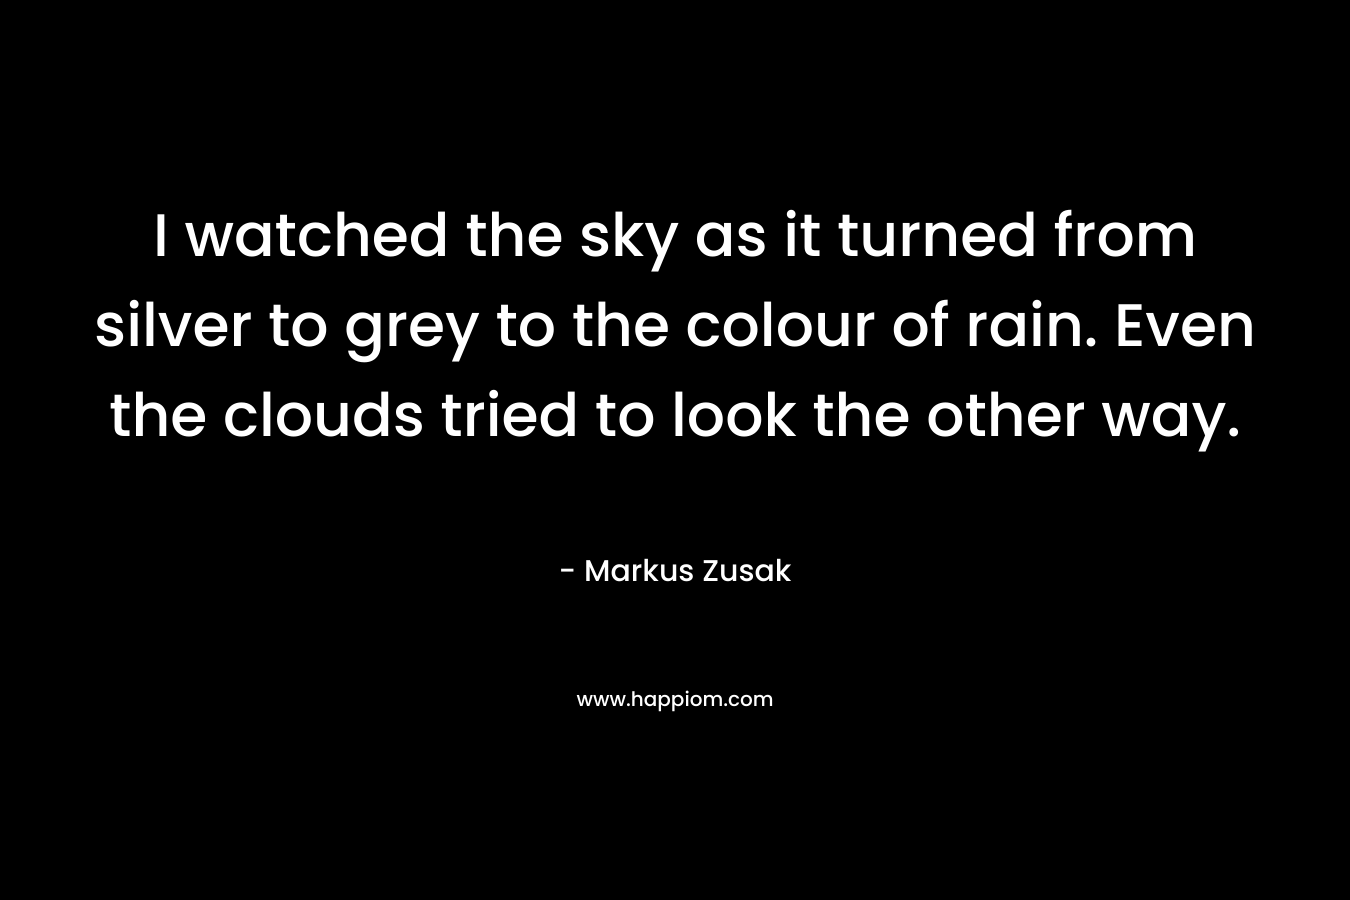 I watched the sky as it turned from silver to grey to the colour of rain. Even the clouds tried to look the other way.